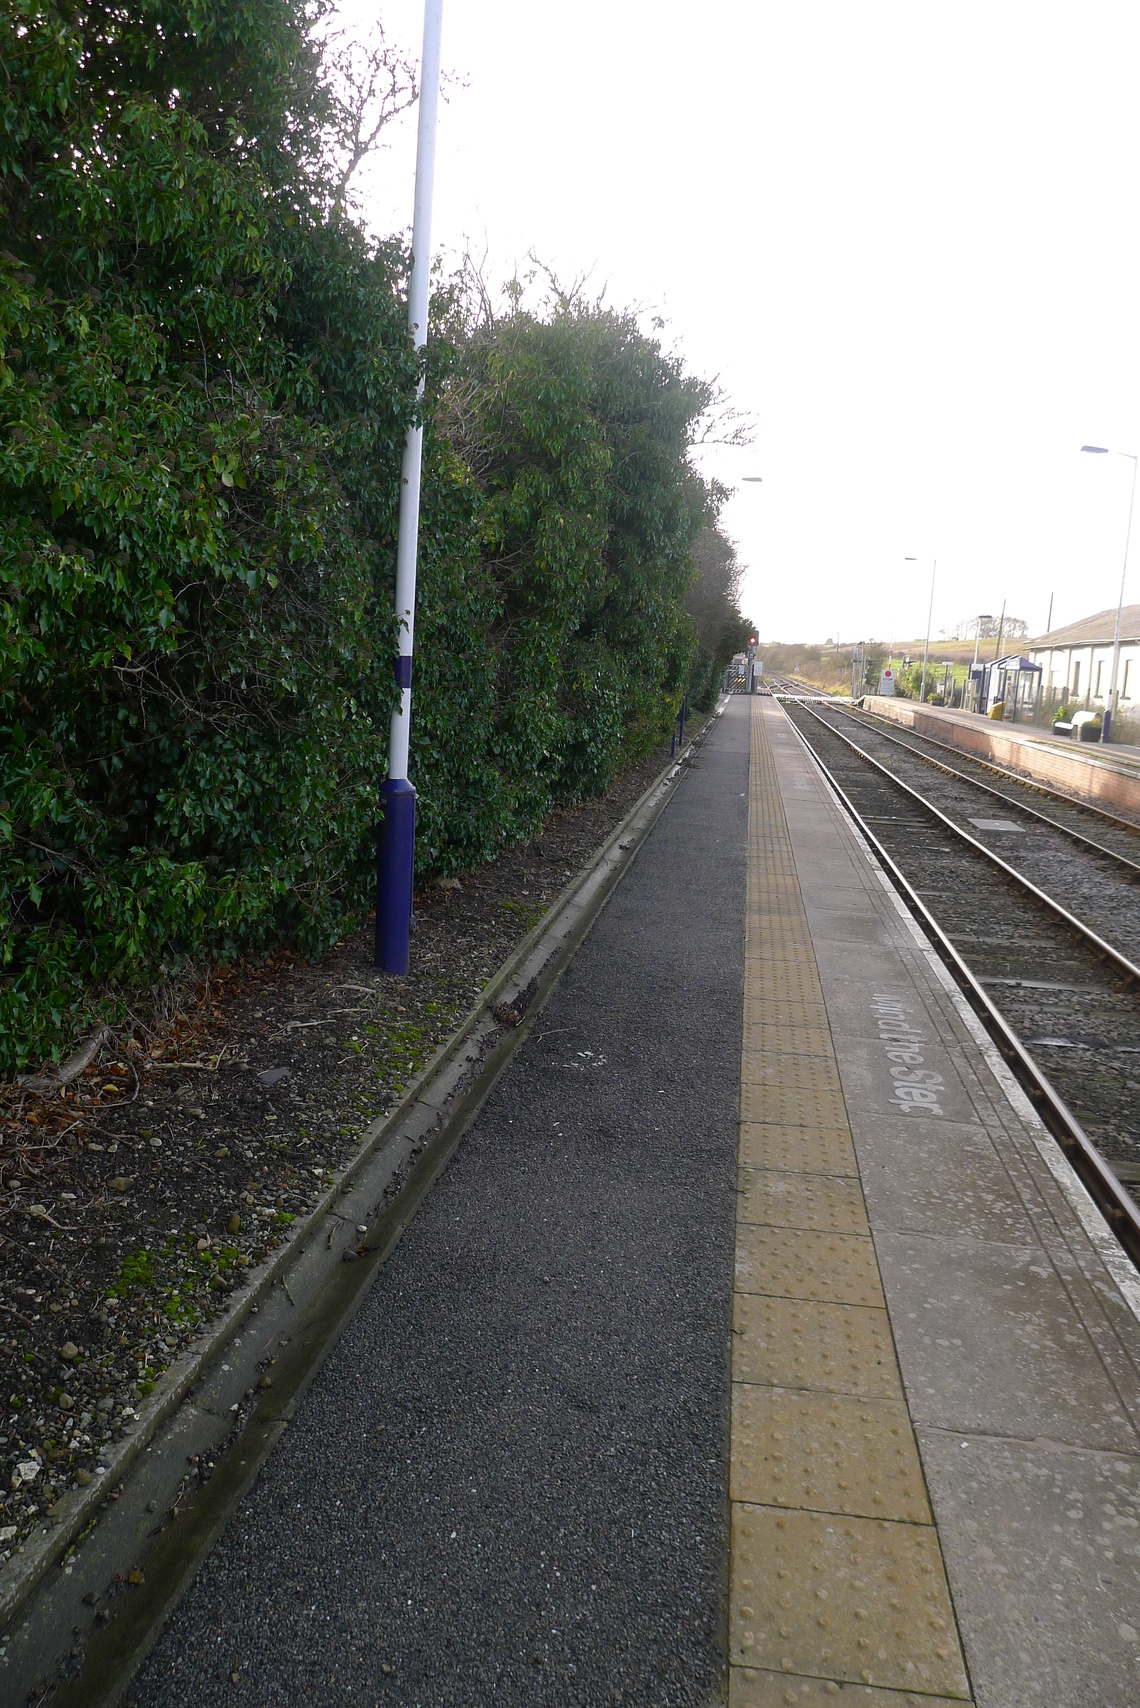 Hunmanby Station Platform 1 over grown hedge looking South